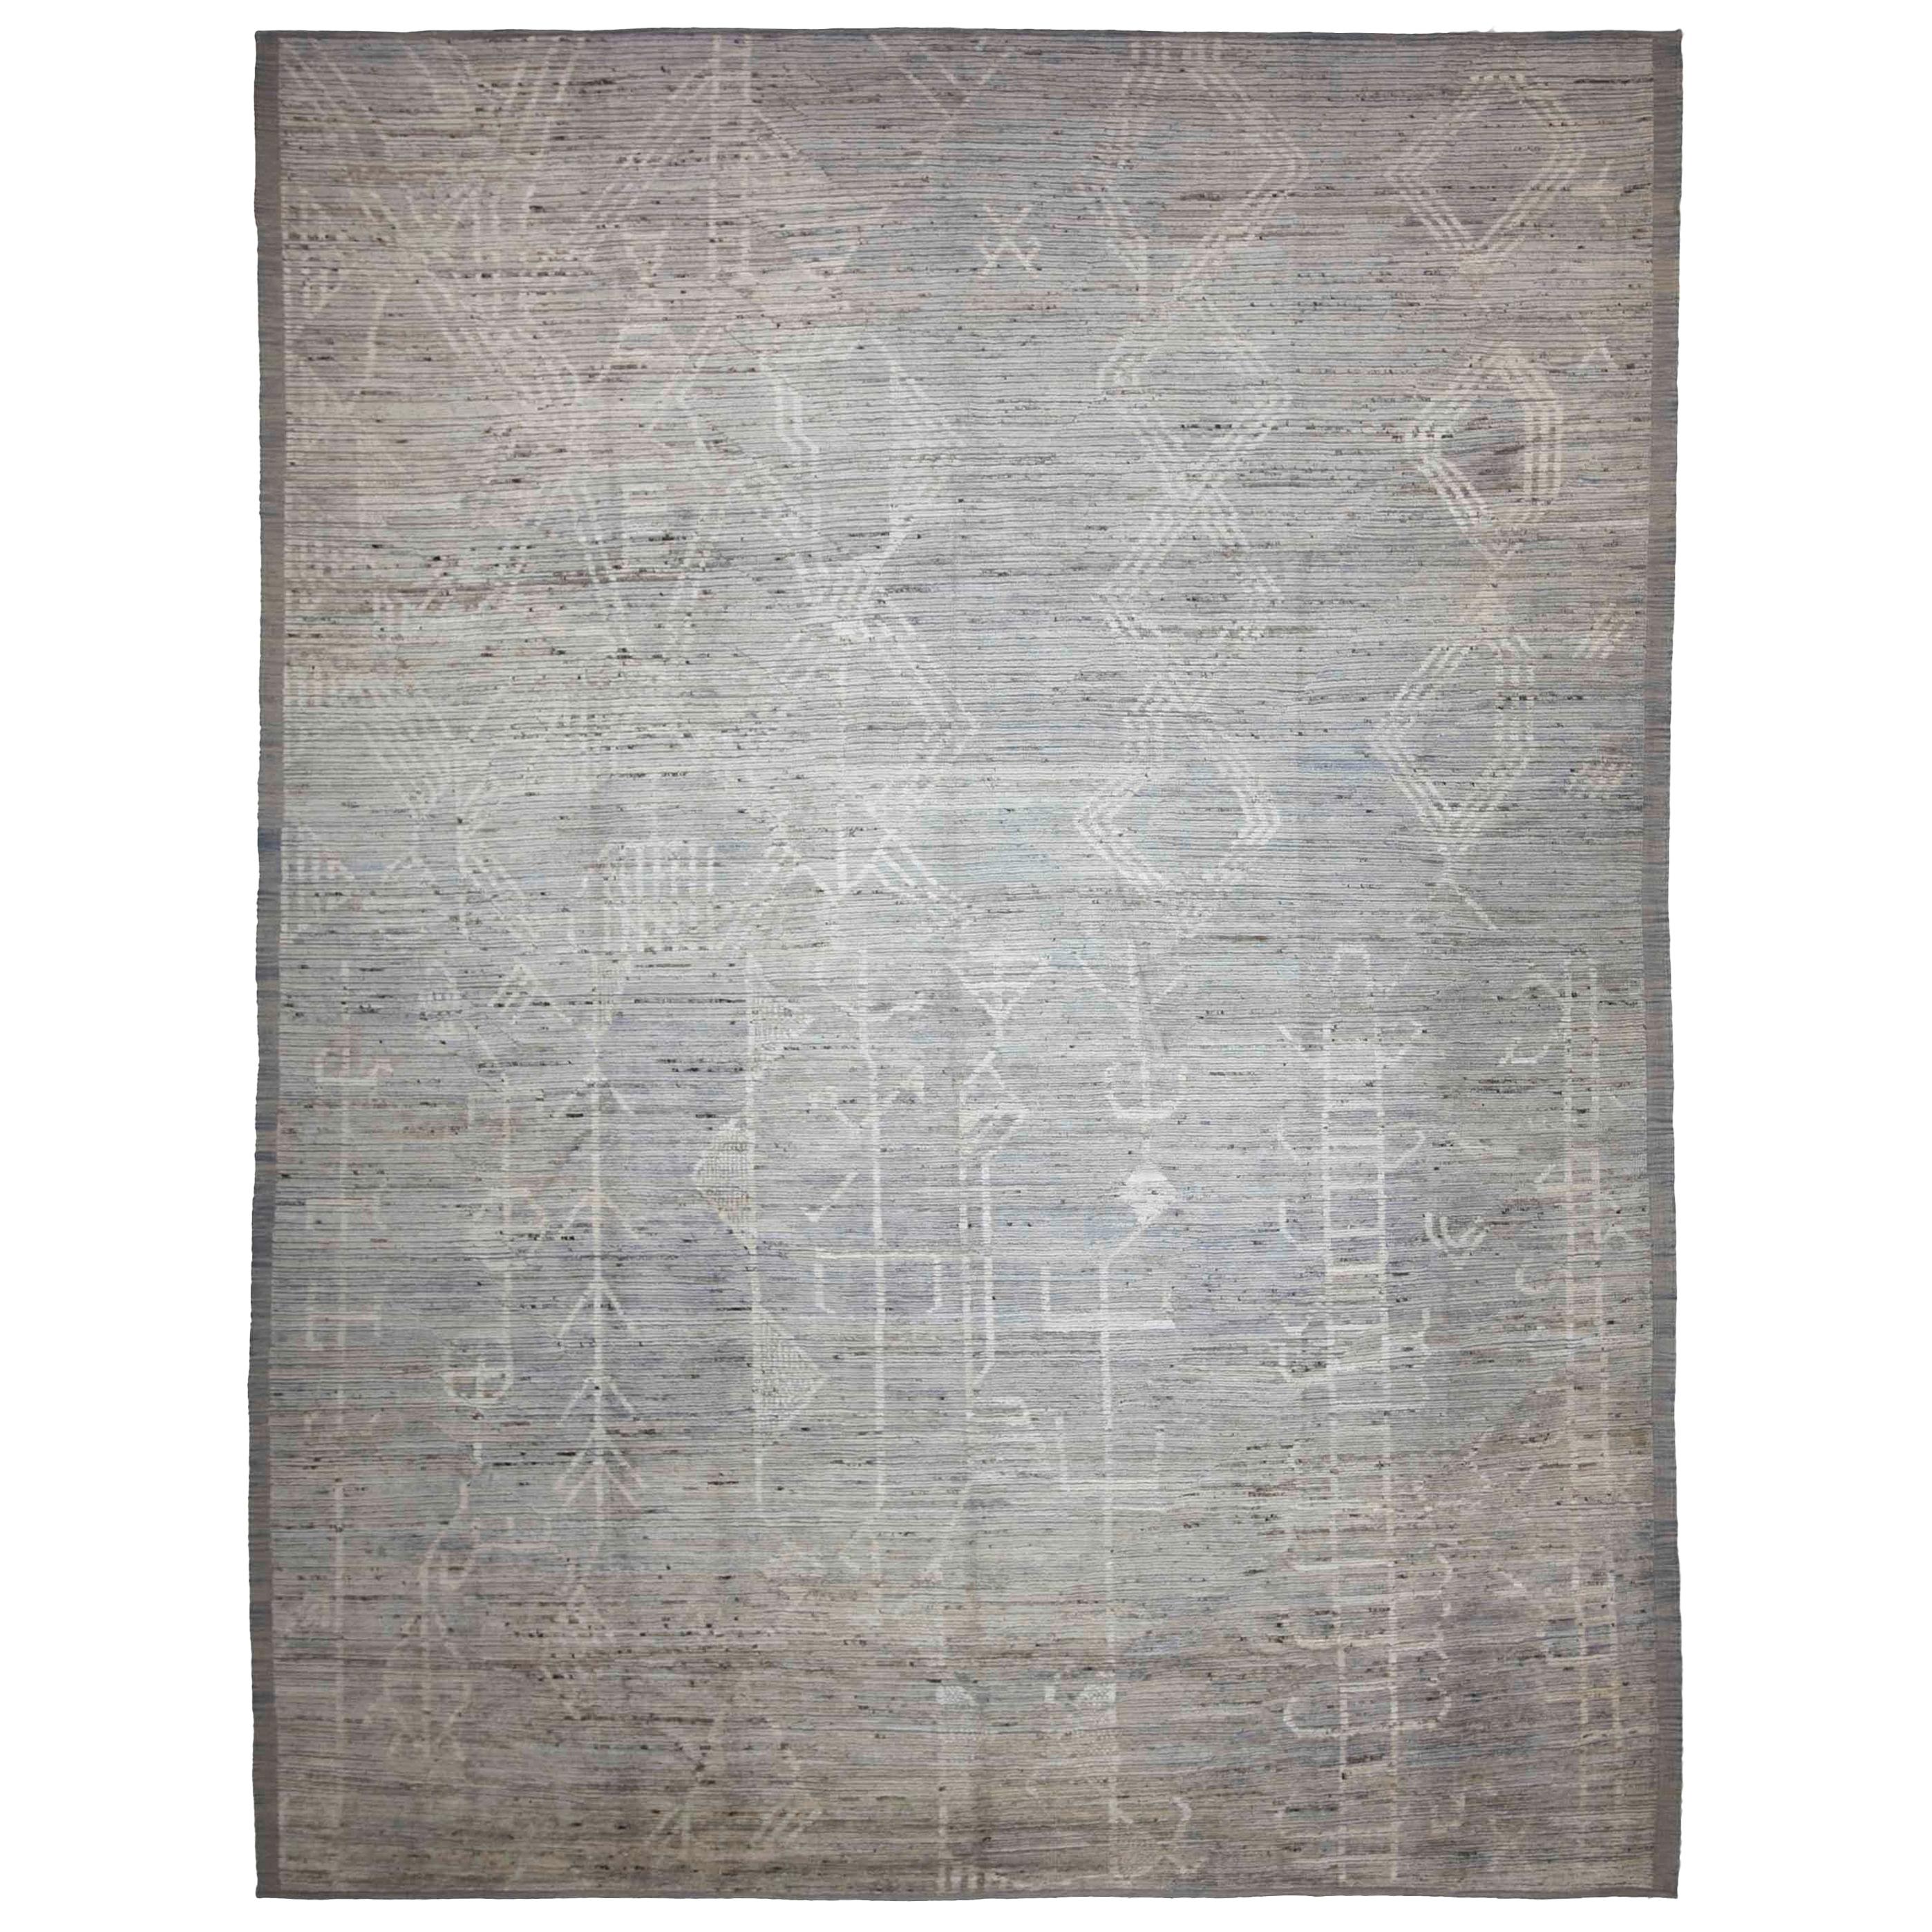 Afghan Moroccan Style Rug with Ivory Tribal Details on Gray and Beige Field